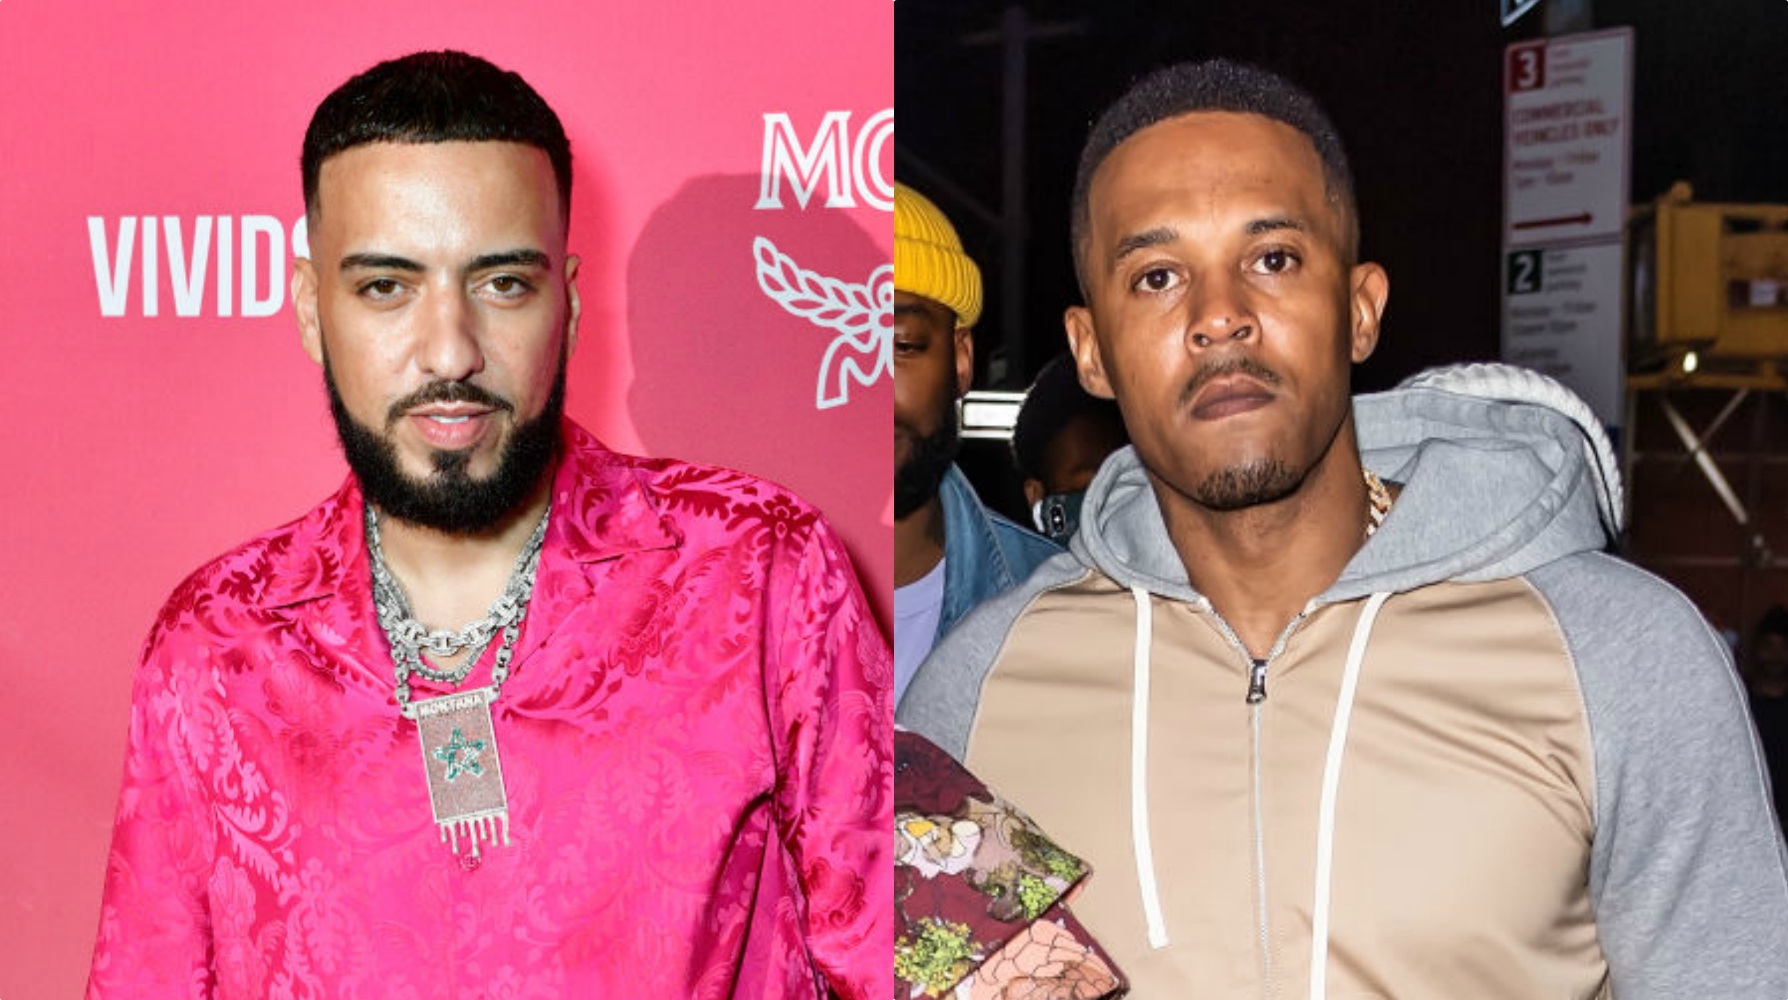 Kenneth Petty, French Montana